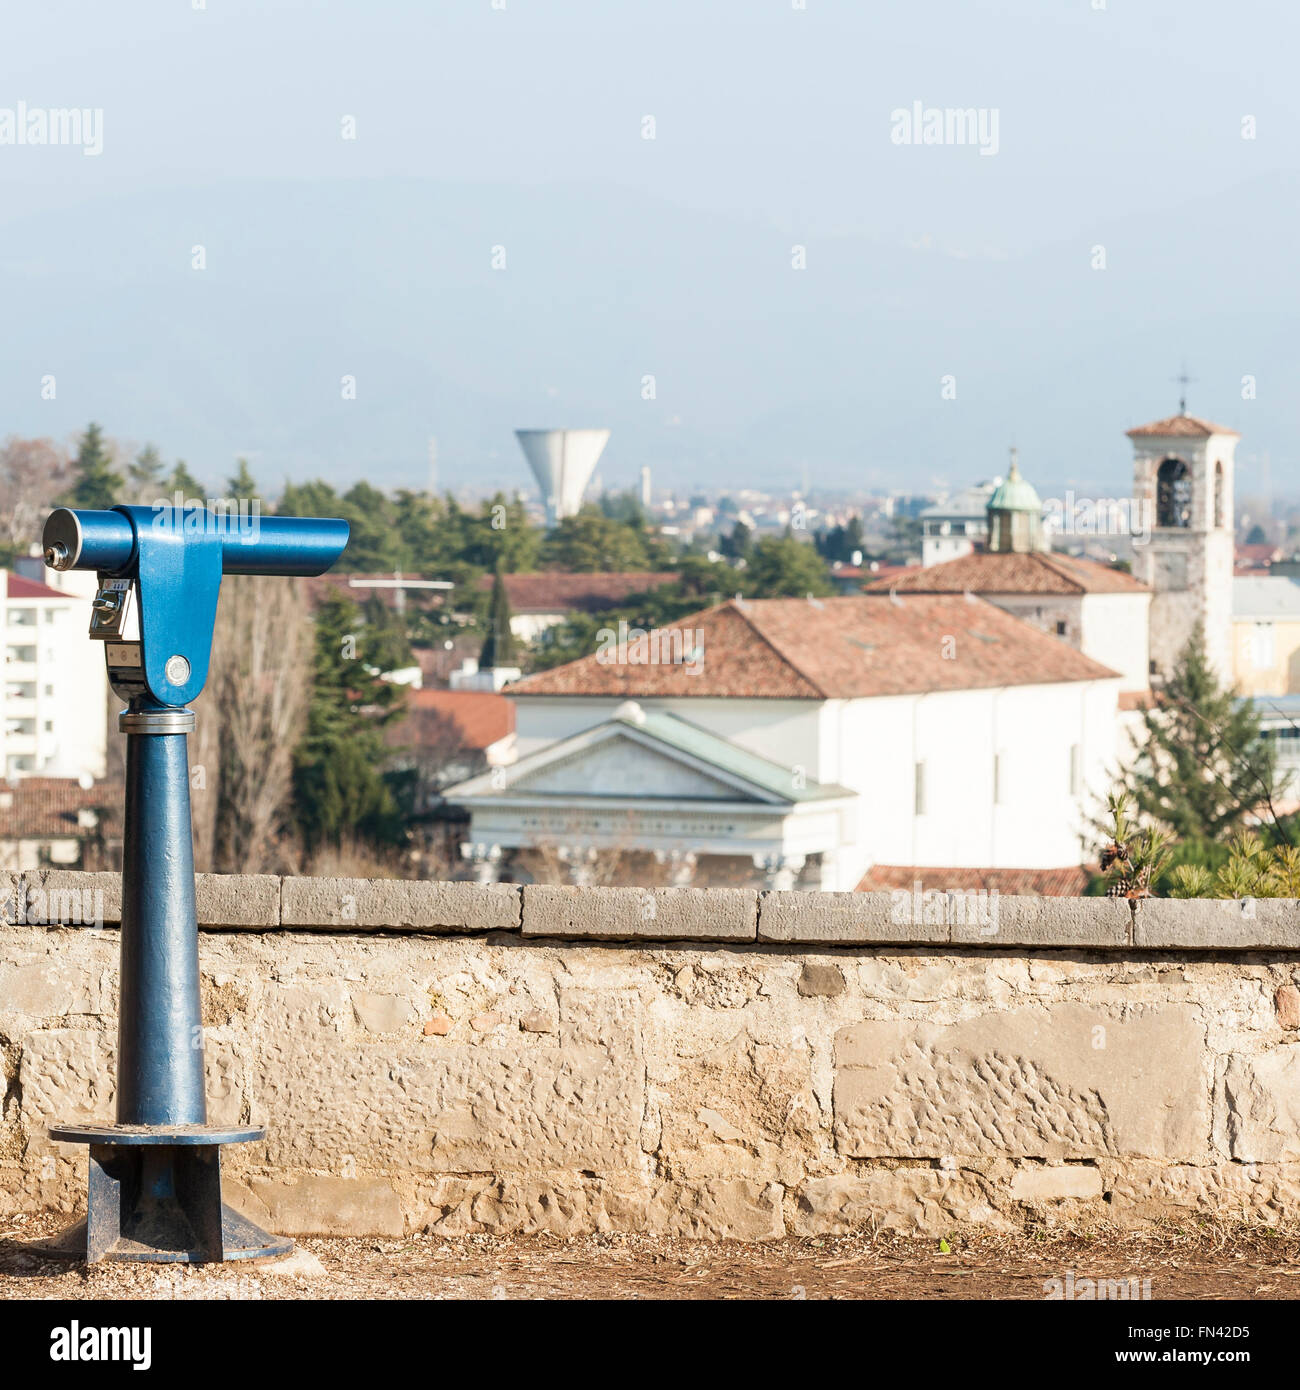 Coin Operated Telescope for sightseeing Italian city of Udine Stock Photo